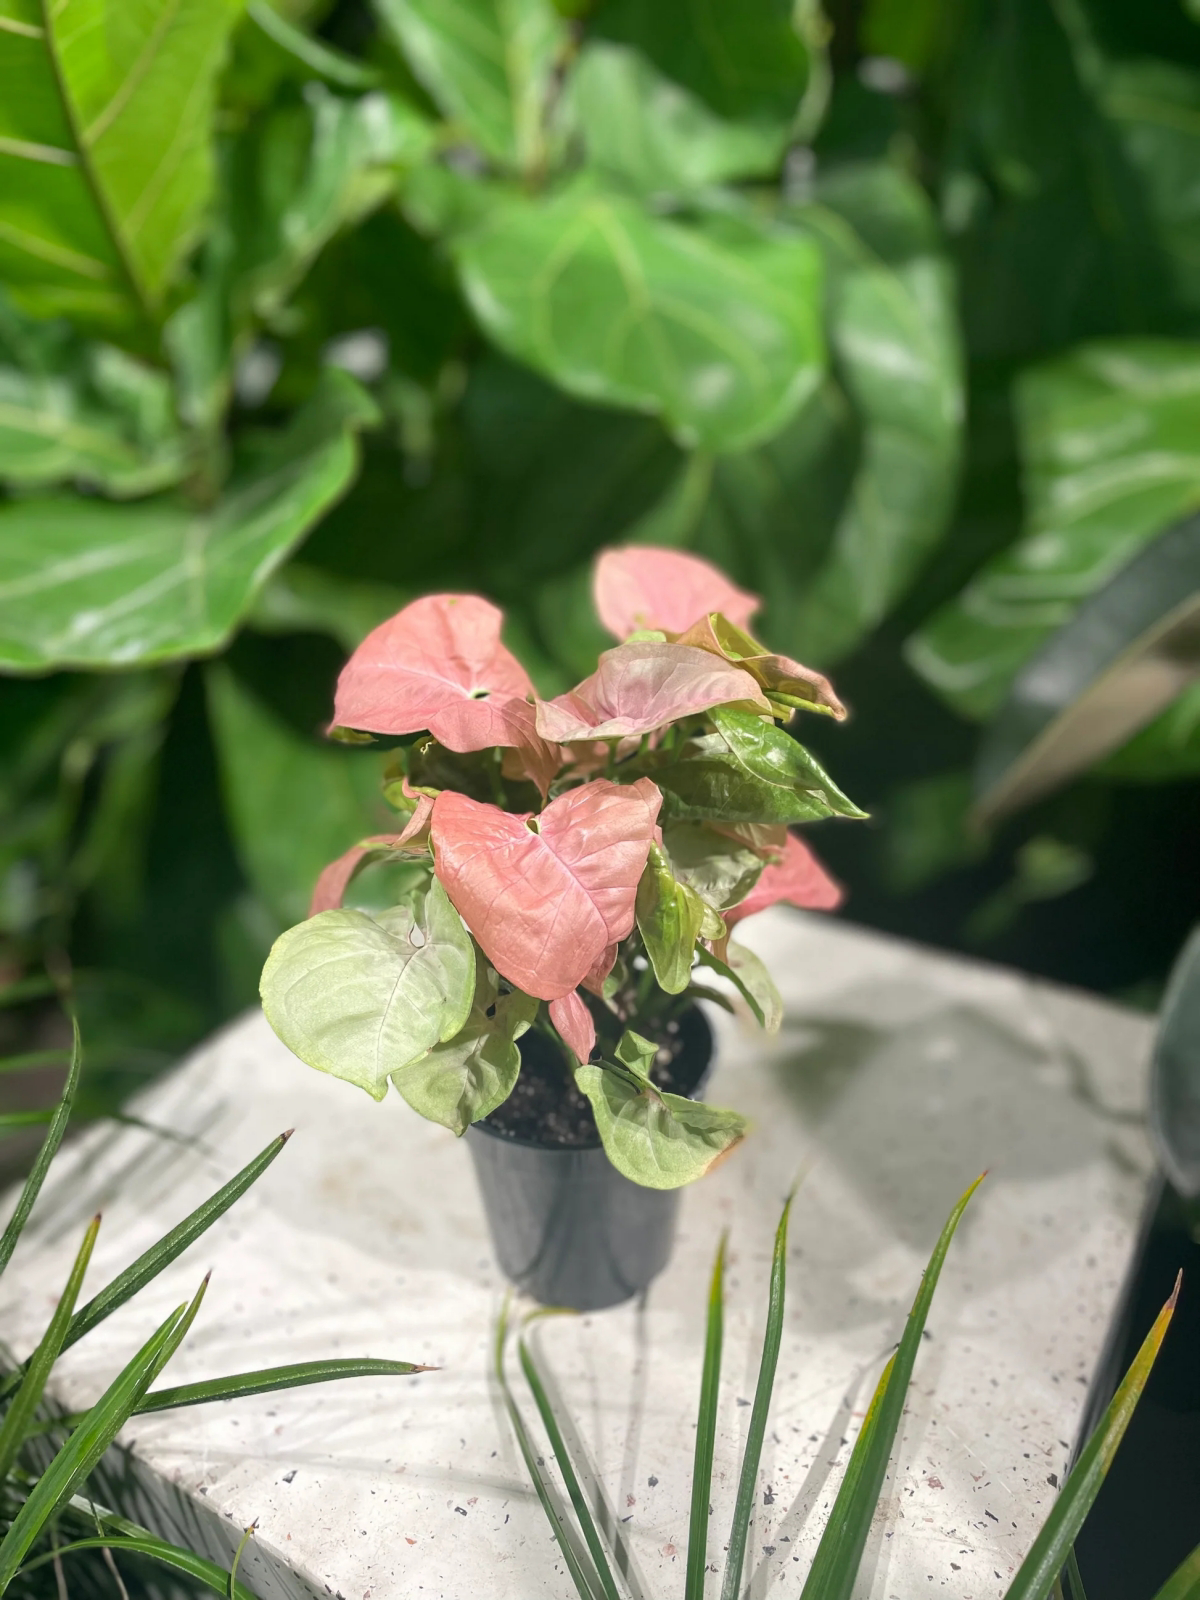 arrowhead plant with pink